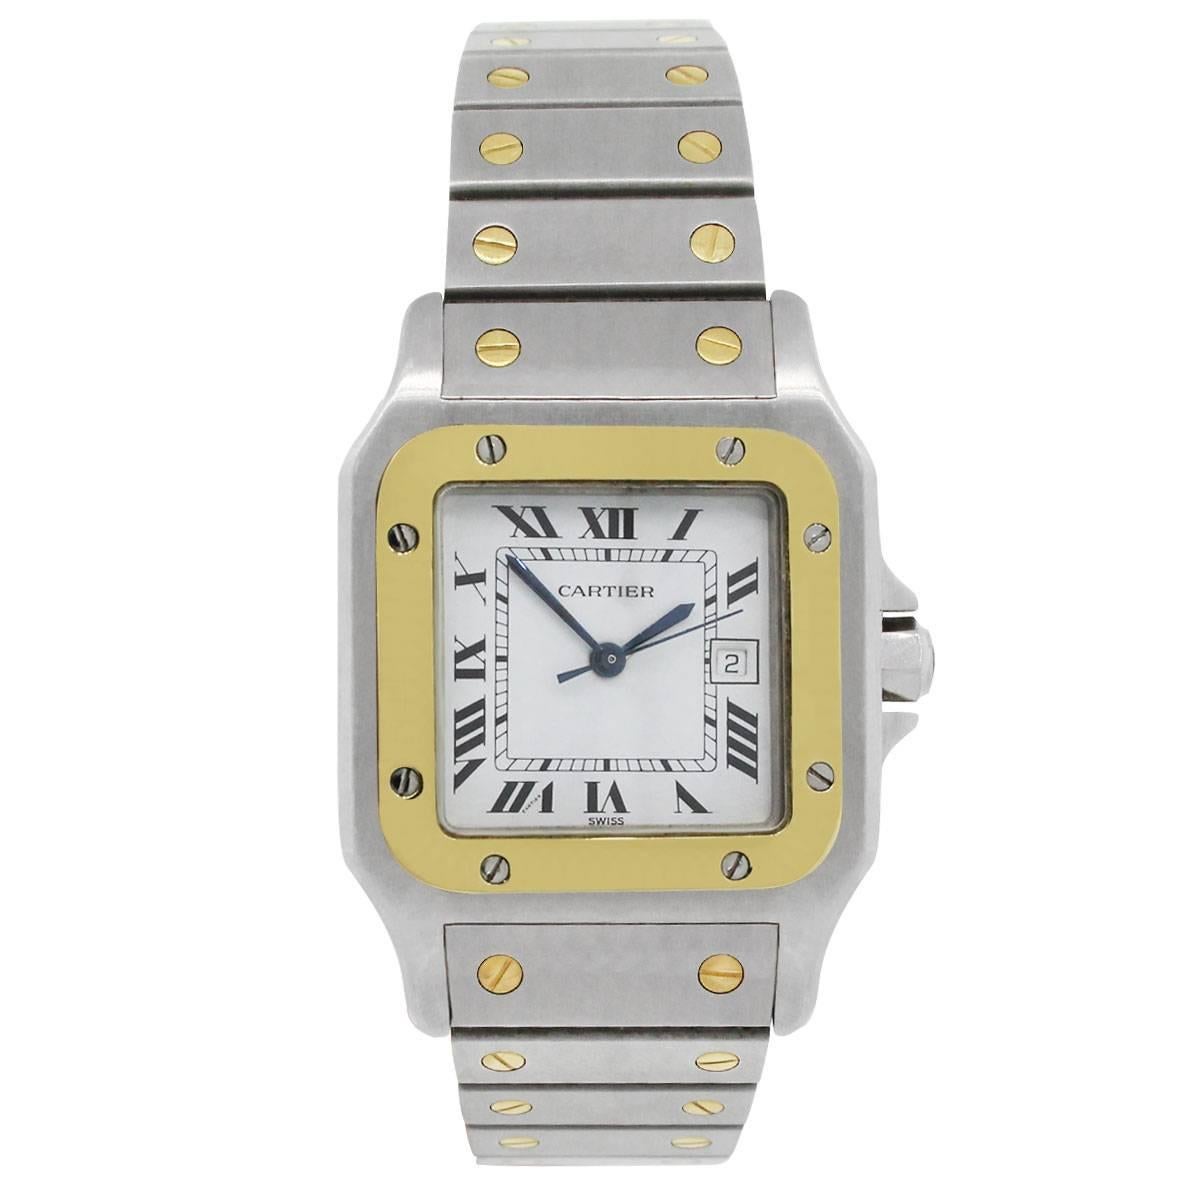 Brand: Cartier
MPN: 2961
Model: Santos Galbee
Case Material: Two tone
Case Diameter: 29mm
Crystal: Scratch resistant sapphire
Bezel: 18k Yellow gold smooth bezel
Dial: White dial with date displayed at 3 o’ clock. Date, Hours, Minutes, and